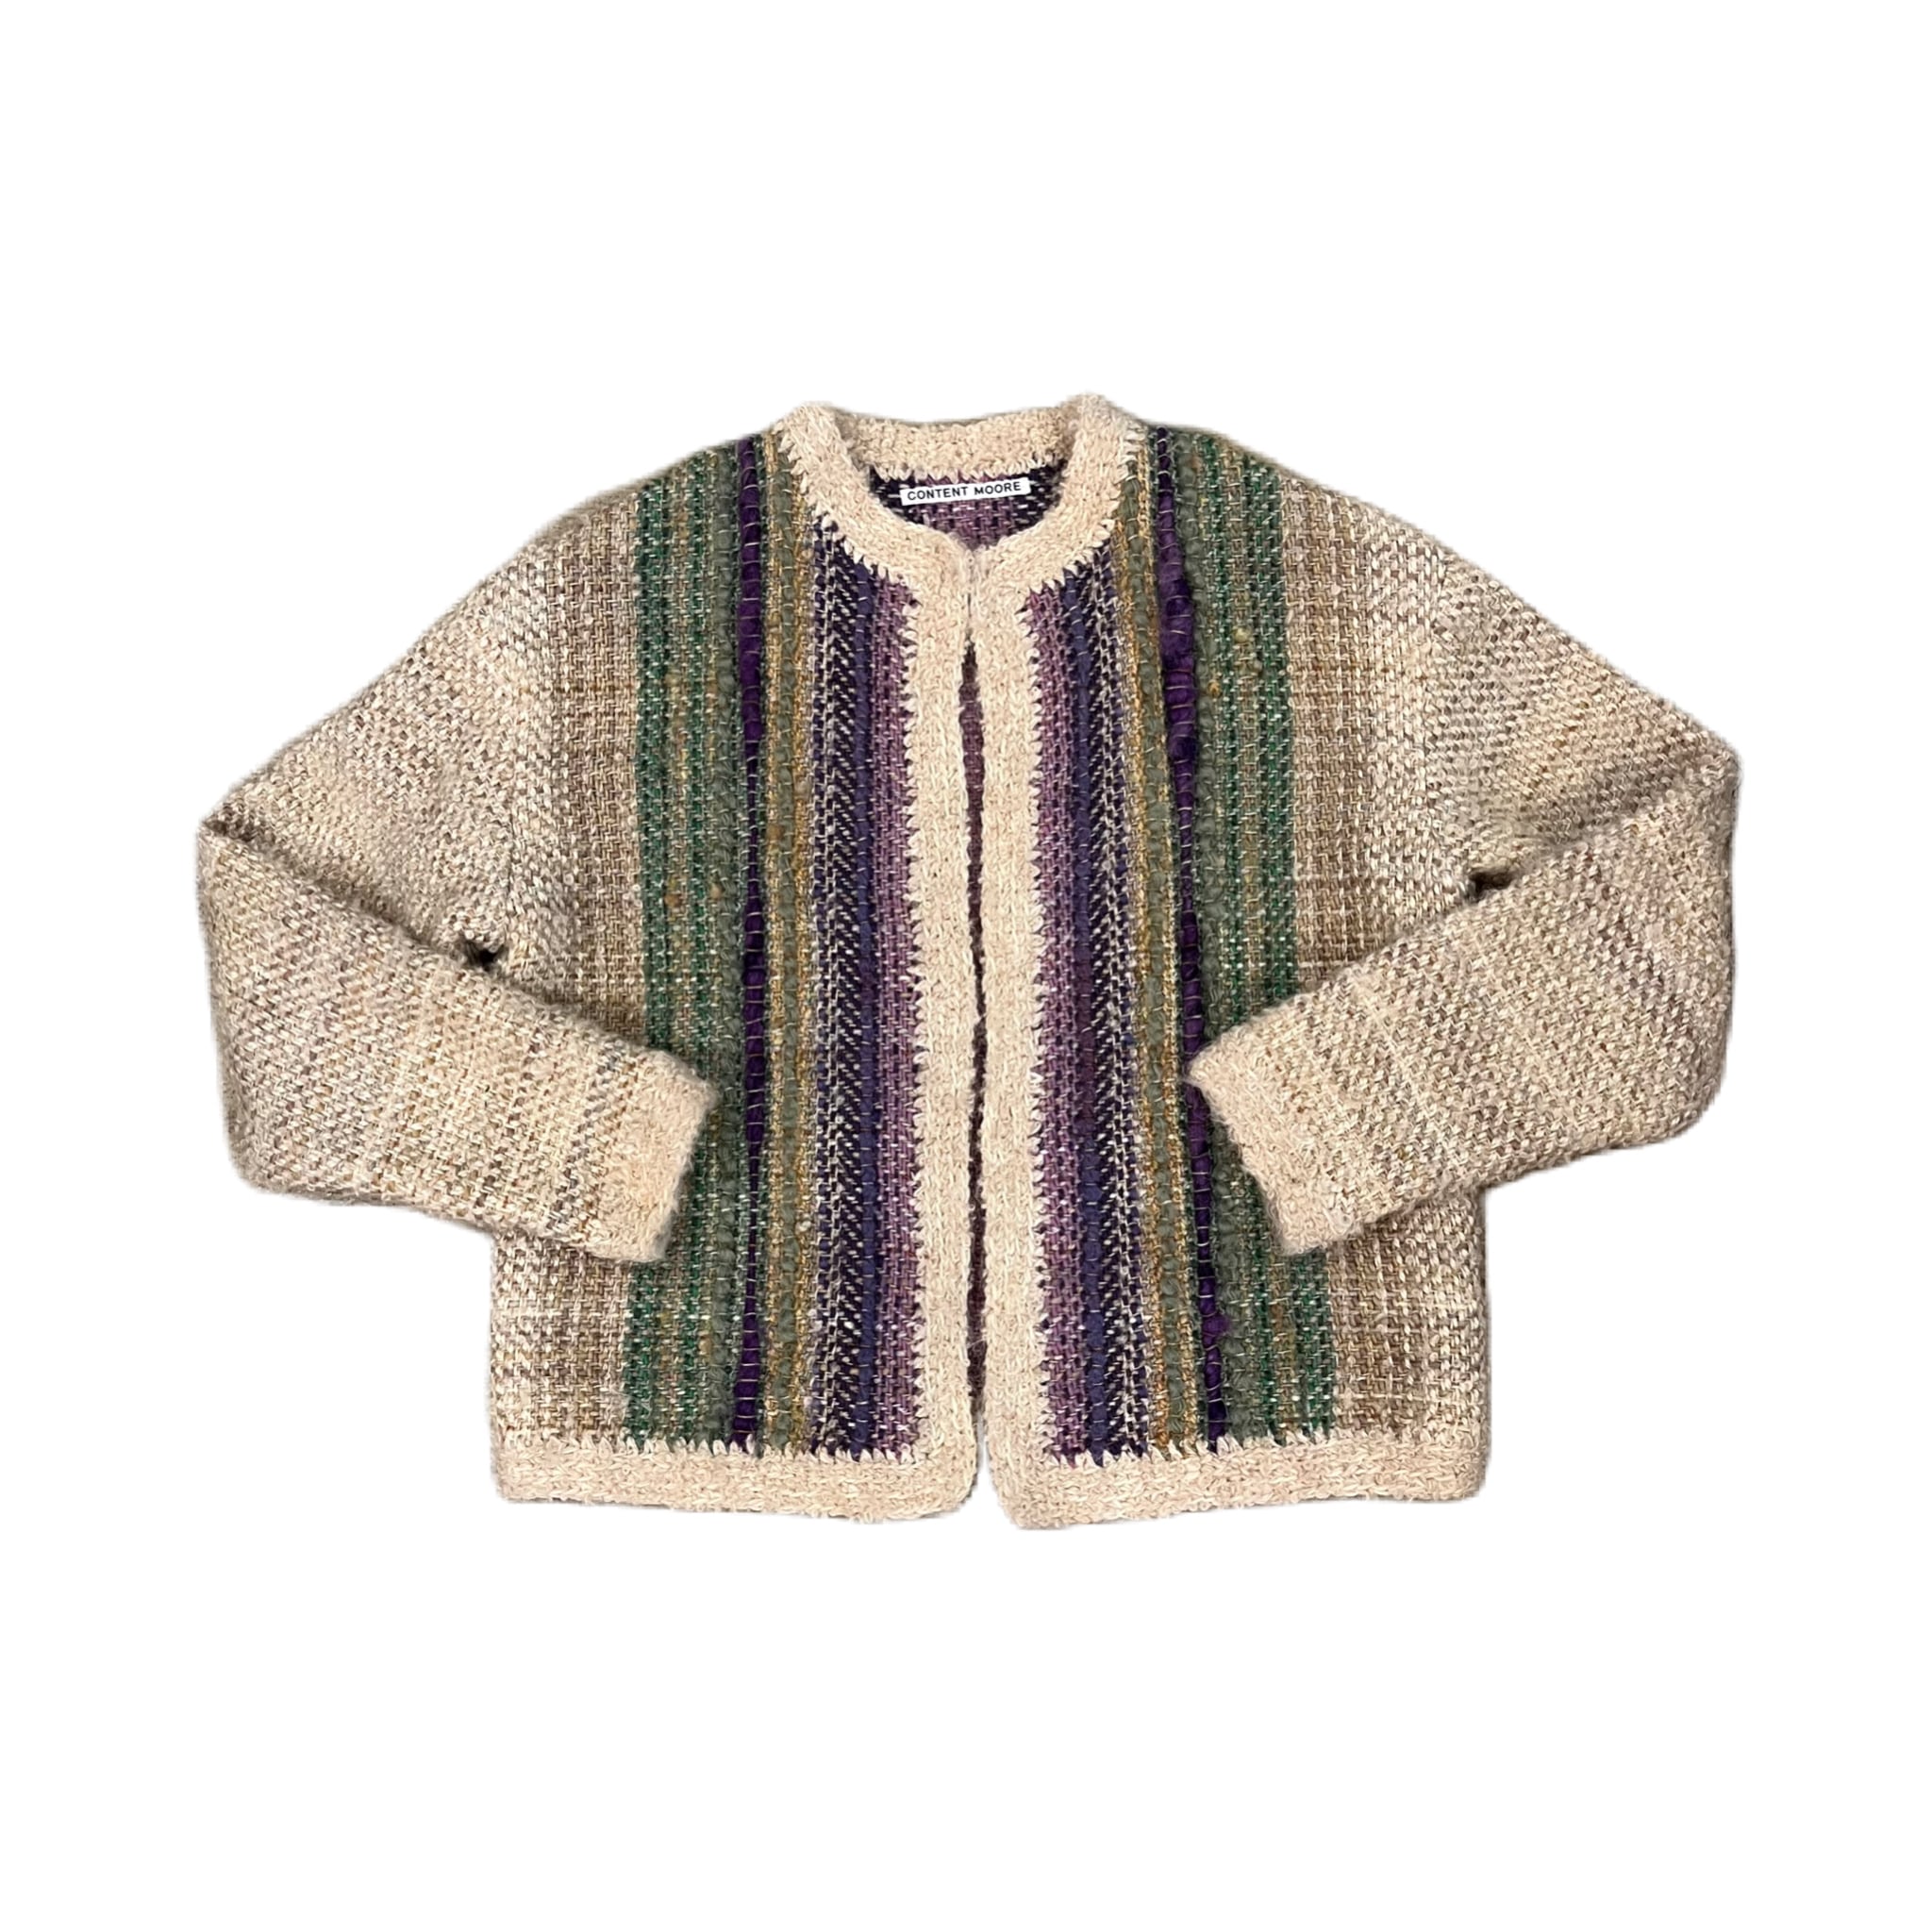 Content Moore Knit Jacket ¥9,200+tax